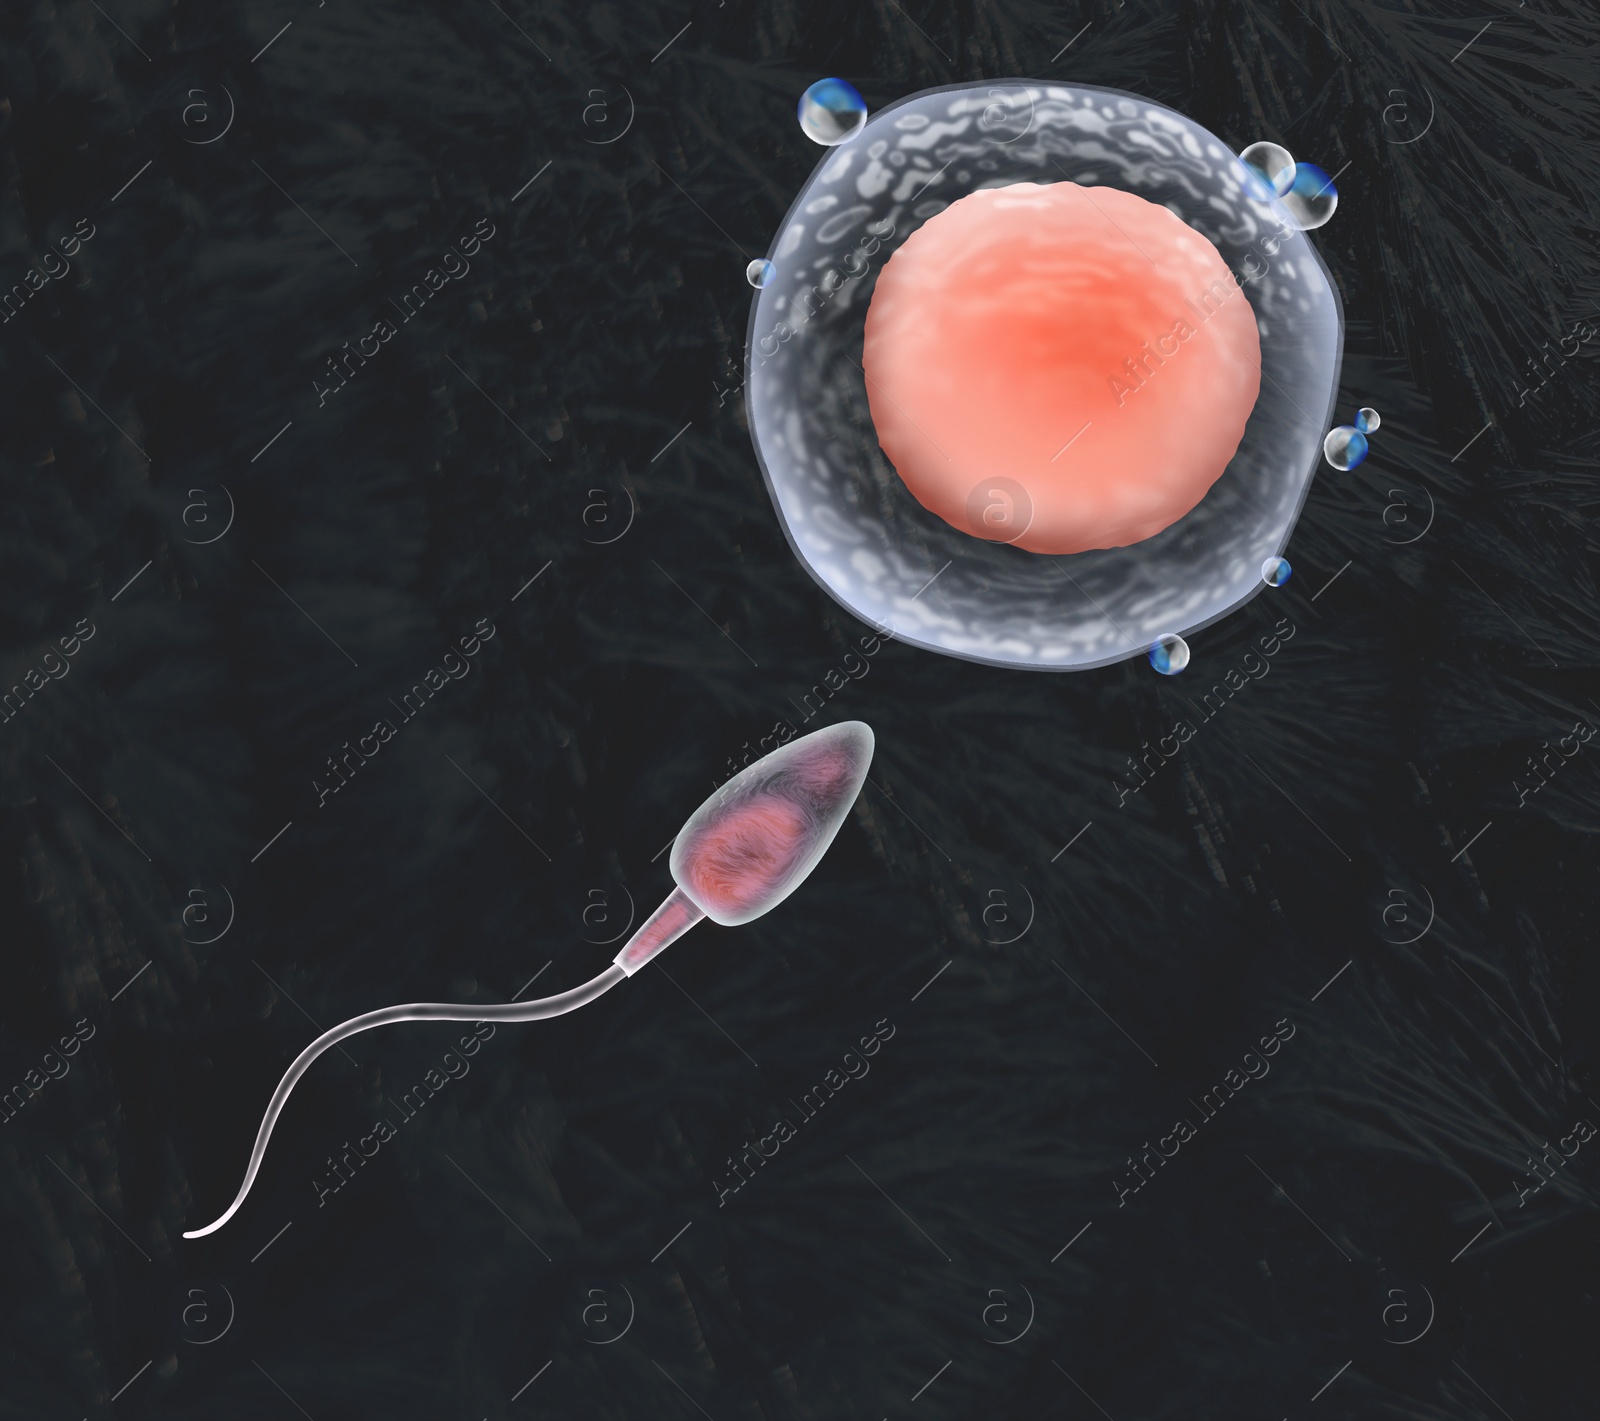 Illustration of Cryopreservation of genetic material. Sperm cell and ovum on black background, frost effect